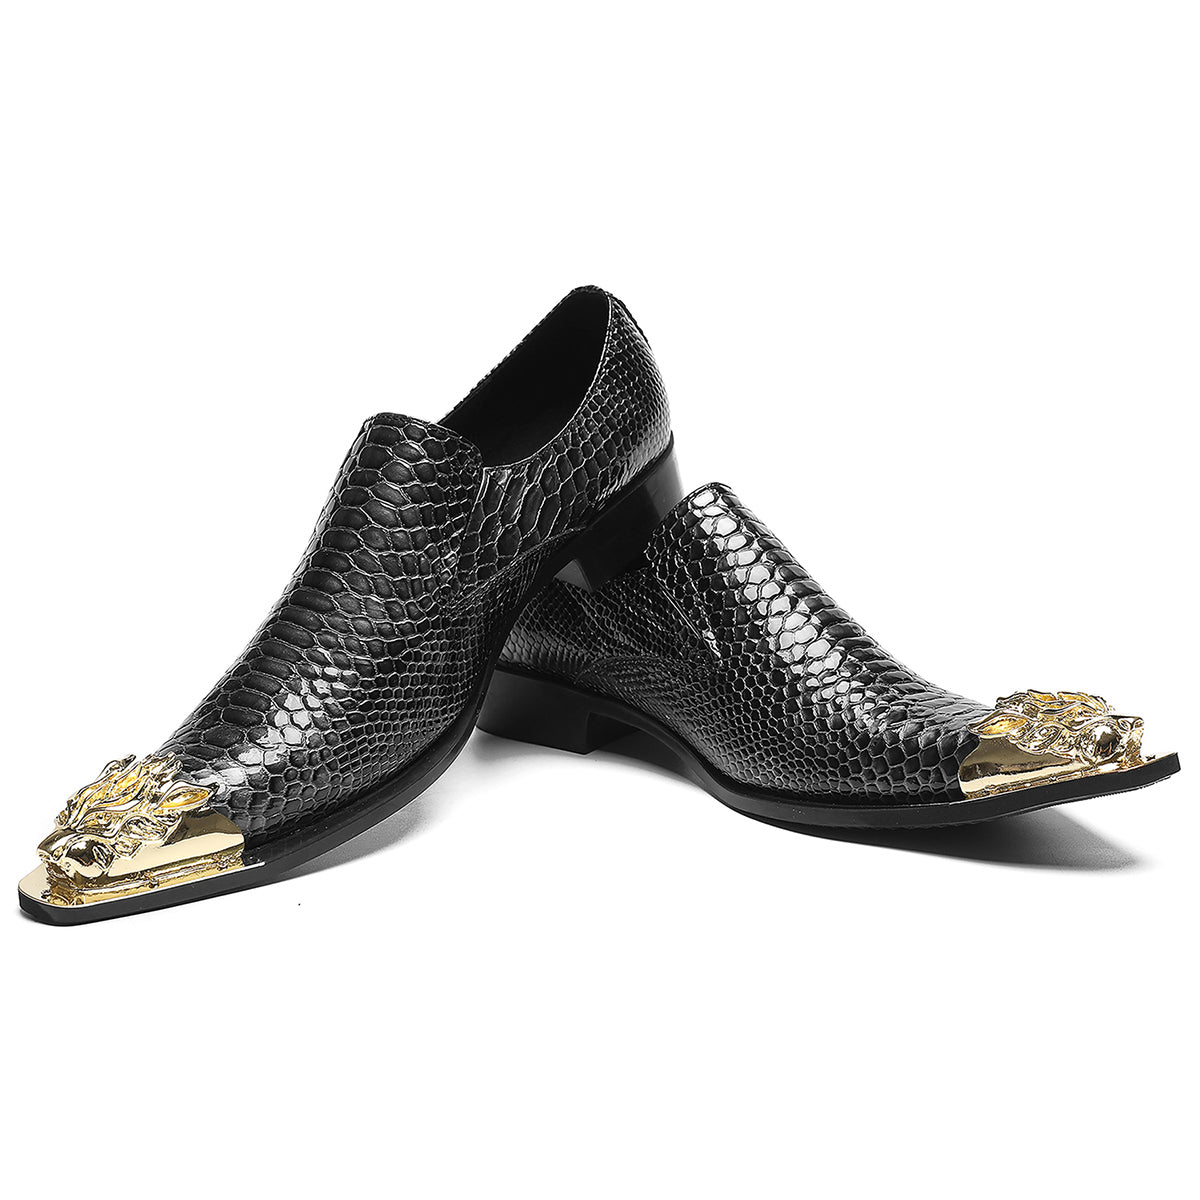 Men's Casual Metal-Tip Toe Penny Loafers